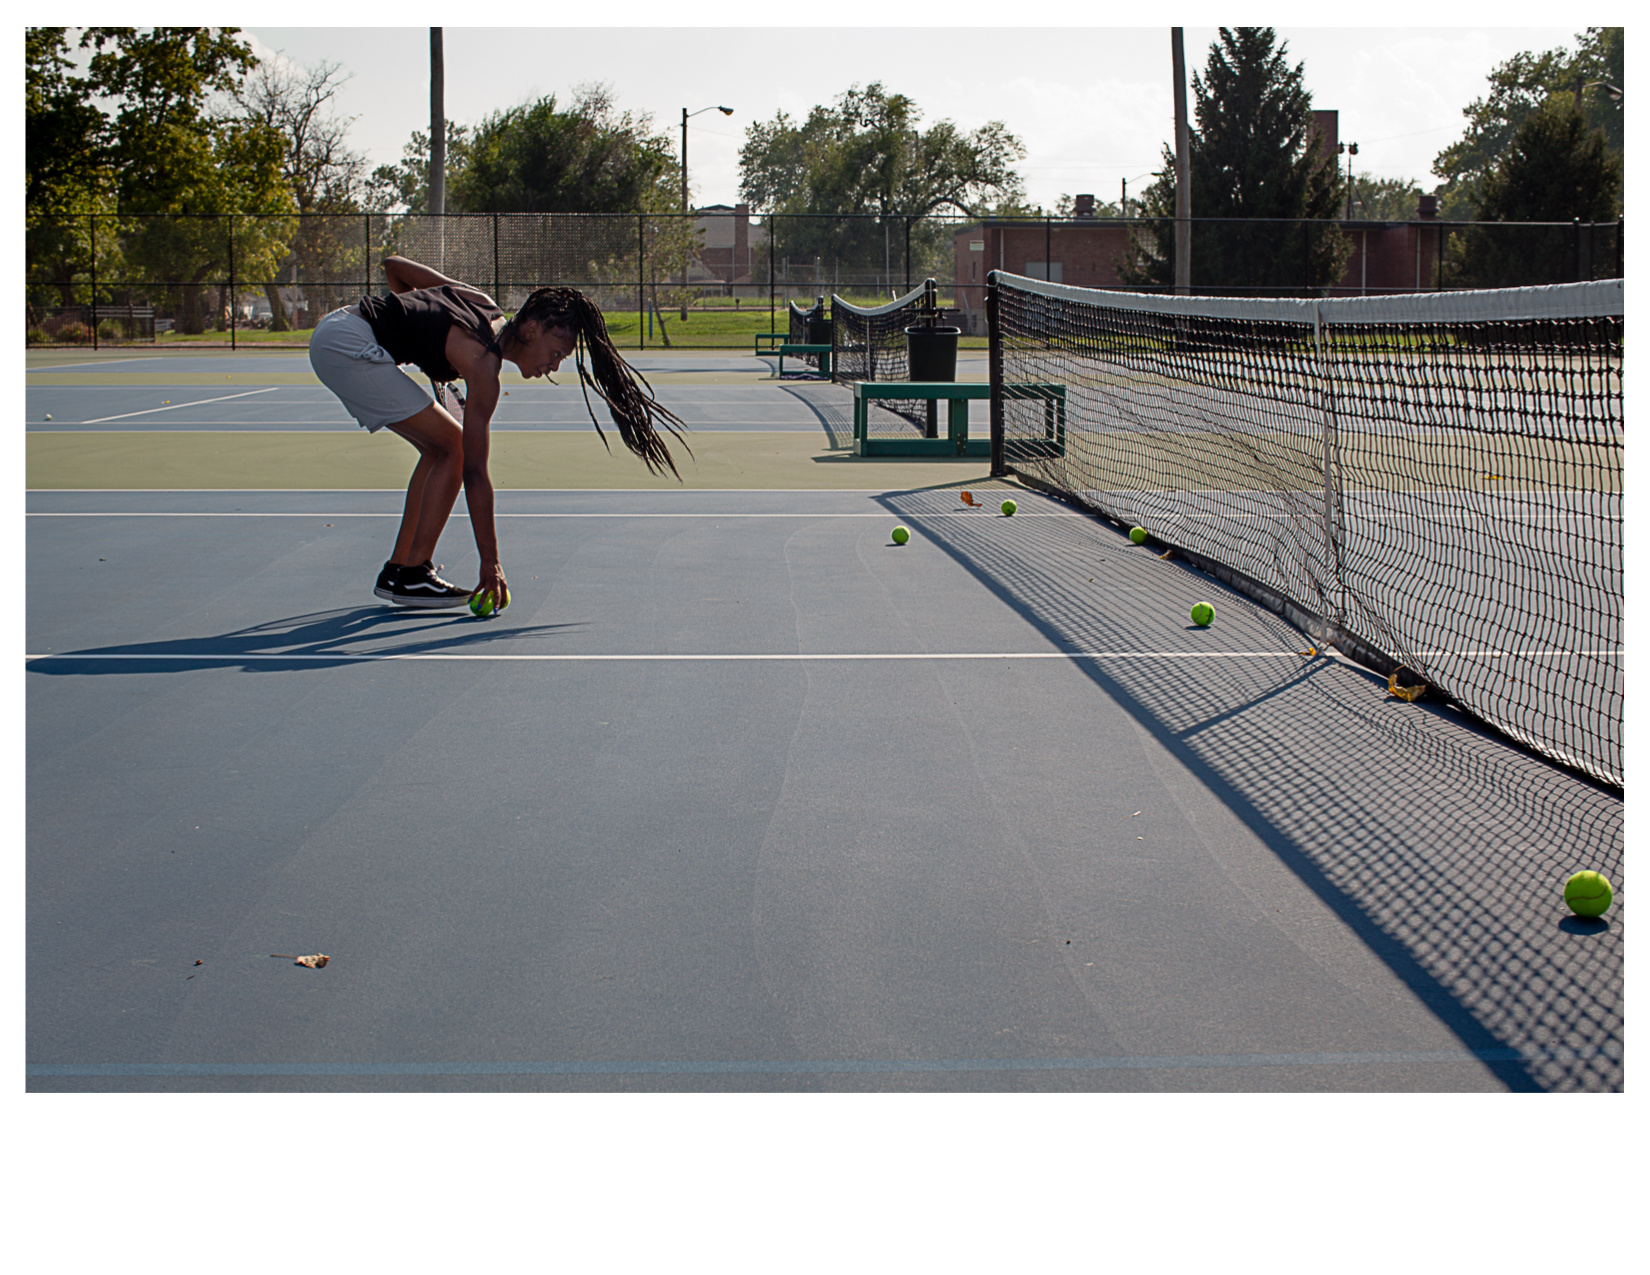 High School Tennis Player in Lincoln Park, East St. Louis, IL